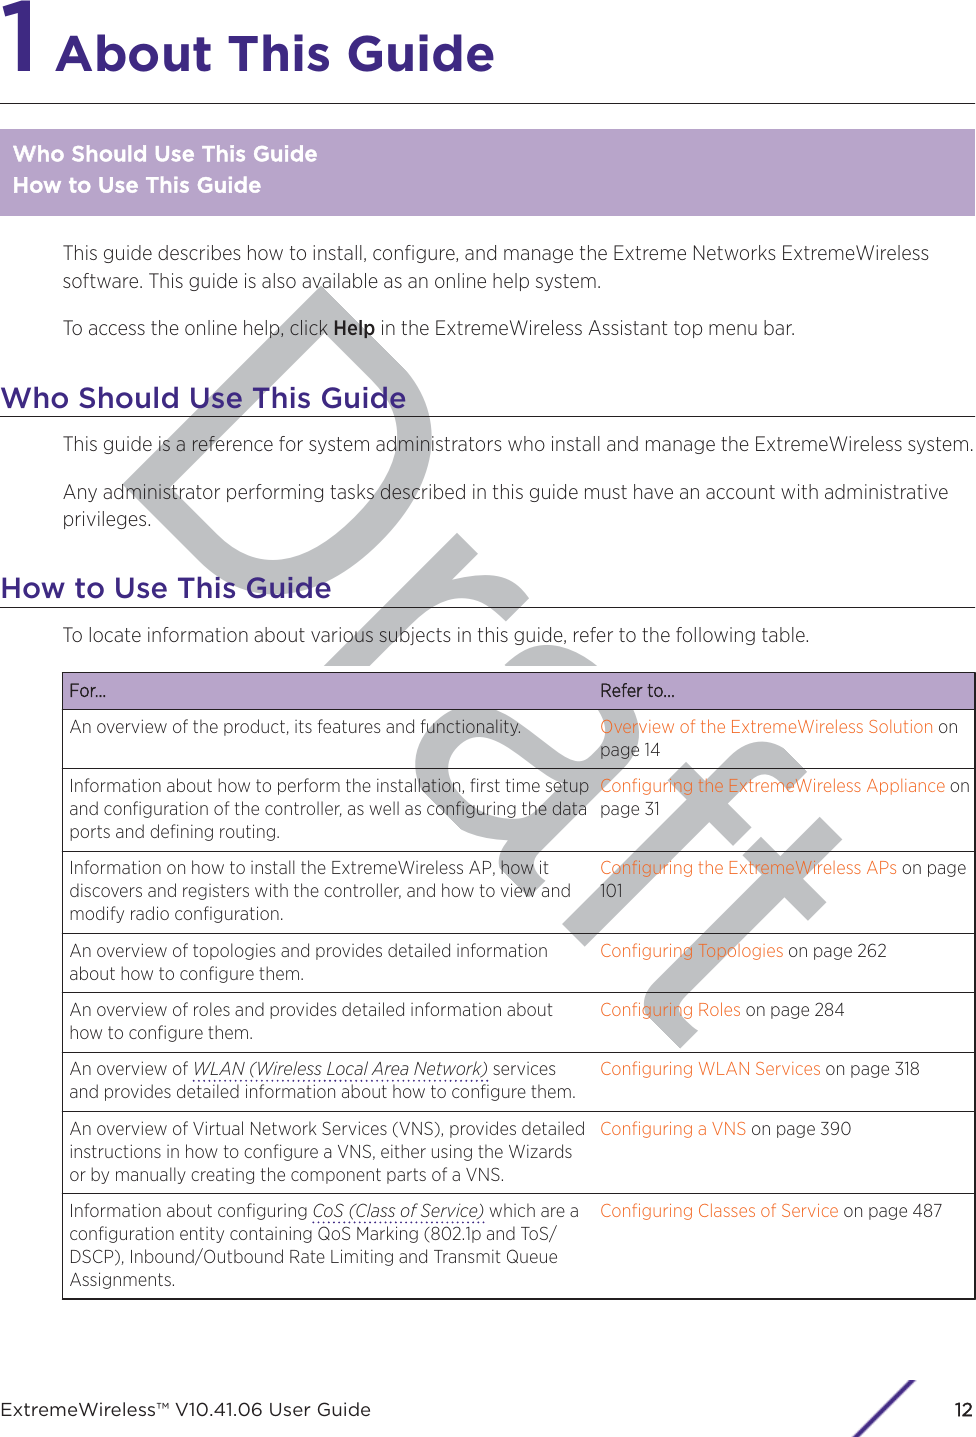 Draft1 About This GuideWWho Should Use This GuideHow to Use This GuideThis guide describes how to install, conﬁgure, and manage the Extreme Networks ExtremeWirelesssoftware. This guide is also available as an online help system.To access the online help, click Help in the ExtremeWireless Assistant top menu bar.Who Should Use This GuideThis guide is a reference for system administrators who install and manage the ExtremeWireless system.Any administrator performing tasks described in this guide must have an account with administrativeprivileges.How to Use This GuideTo locate information about various subjects in this guide, refer to the following table.For... Refer to...An overview of the product, its features and functionality. Overview of the ExtremeWireless Solution onpage 14Information about how to perform the installation, ﬁrst time setupand conﬁguration of the controller, as well as conﬁguring the dataports and deﬁning routing.Conﬁguring the ExtremeWireless Appliance onpage 31Information on how to install the ExtremeWireless AP, how itdiscovers and registers with the controller, and how to view andmodify radio conﬁguration.Conﬁguring the ExtremeWireless APs on page101An overview of topologies and provides detailed informationabout how to conﬁgure them.Conﬁguring Topologies on page 262An overview of roles and provides detailed information abouthow to conﬁgure them.Conﬁguring Roles on page 284An overview of WLAN (Wireless Local Area Network) servicesand provides detailed information about how to conﬁgure them.Conﬁguring WLAN Services on page 318An overview of Virtual Network Services (VNS), provides detailedinstructions in how to conﬁgure a VNS, either using the Wizardsor by manually creating the component parts of a VNS.Conﬁguring a VNS on page 390Information about conﬁguring CoS (Class of Service) which are aconﬁguration entity containing QoS Marking (802.1p and ToS/DSCP), Inbound/Outbound Rate Limiting and Transmit QueueAssignments.Conﬁguring Classes of Service on page 487ExtremeWireless™ V10.41.06 User Guide12